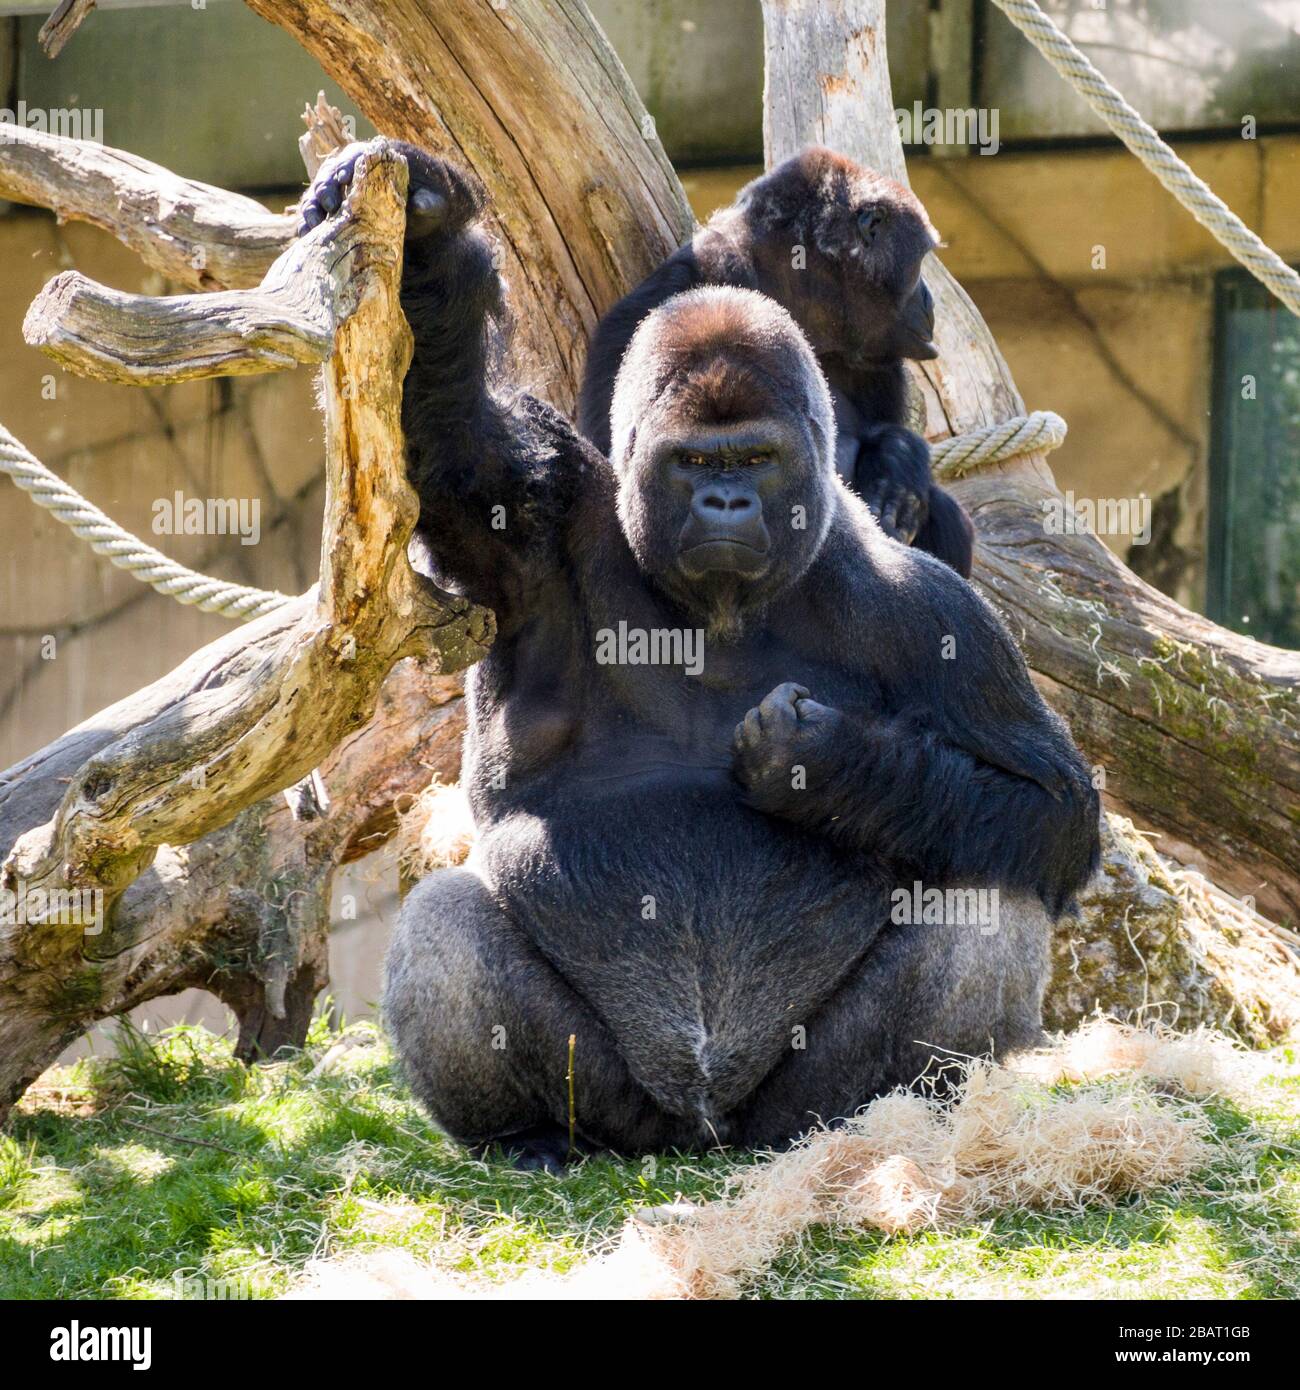 Defiant Stance: A large mature gorilla clenches one fist against his heart and raises the other arm skyward as it stairs down onlookers. Stock Photo